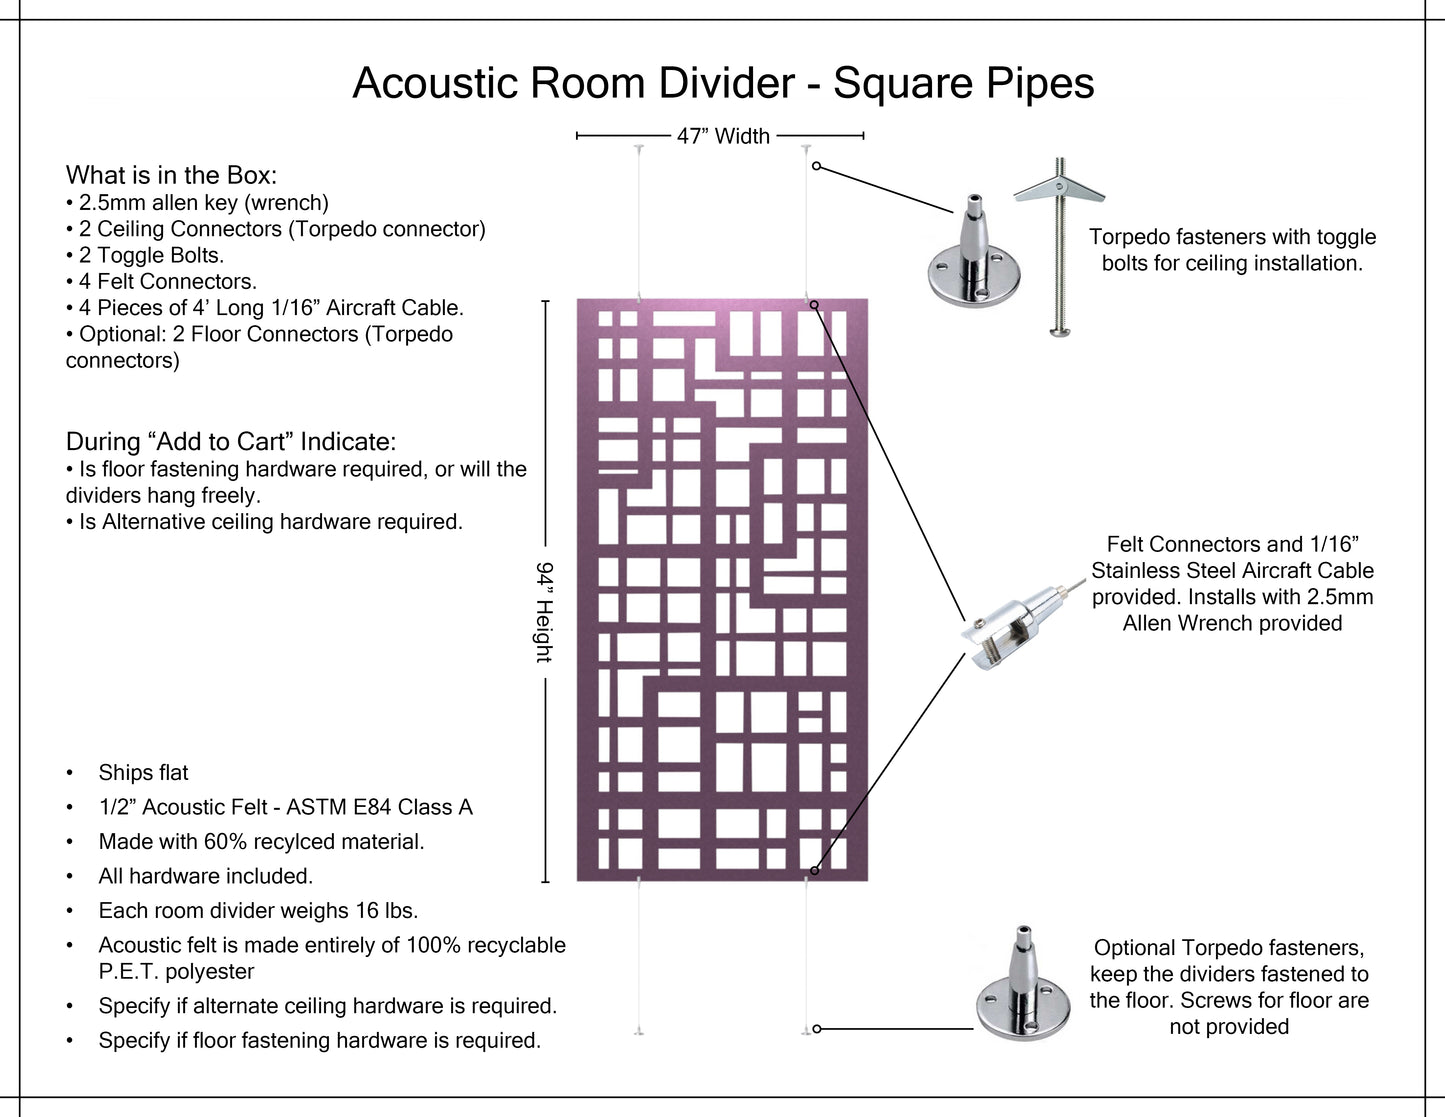 4x8 Acoustic Room Divider - Square Pipes